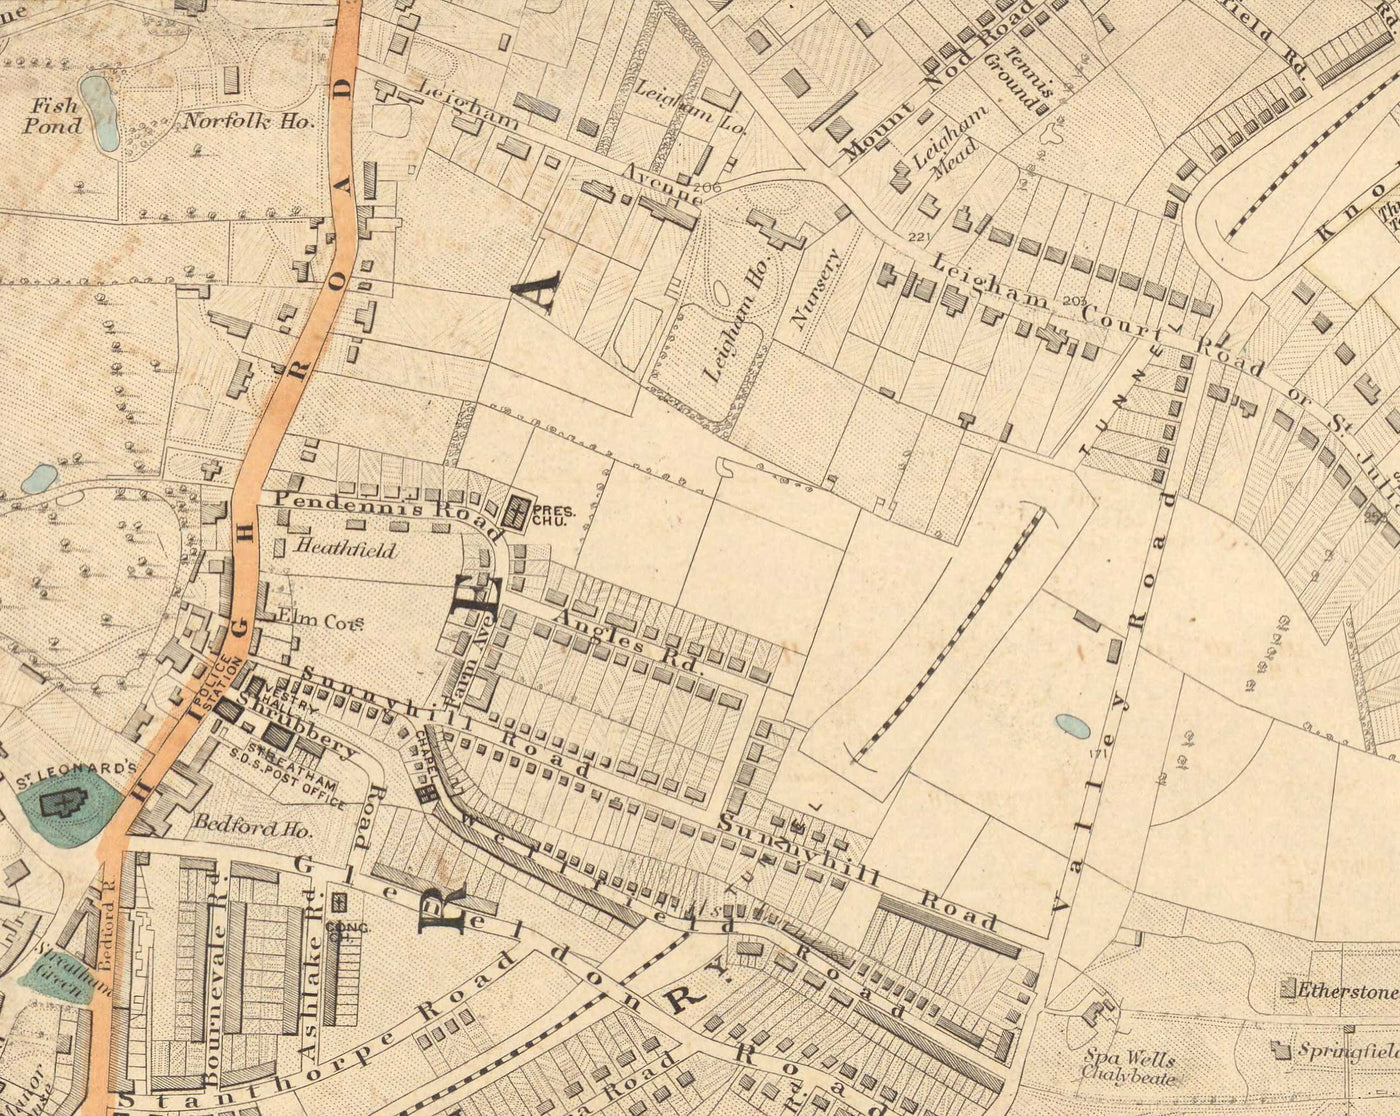 Old Colour Map of South London in 1891 - Streatham, Tooting, Mitcham, Norbury - SW17, SW16, CR4